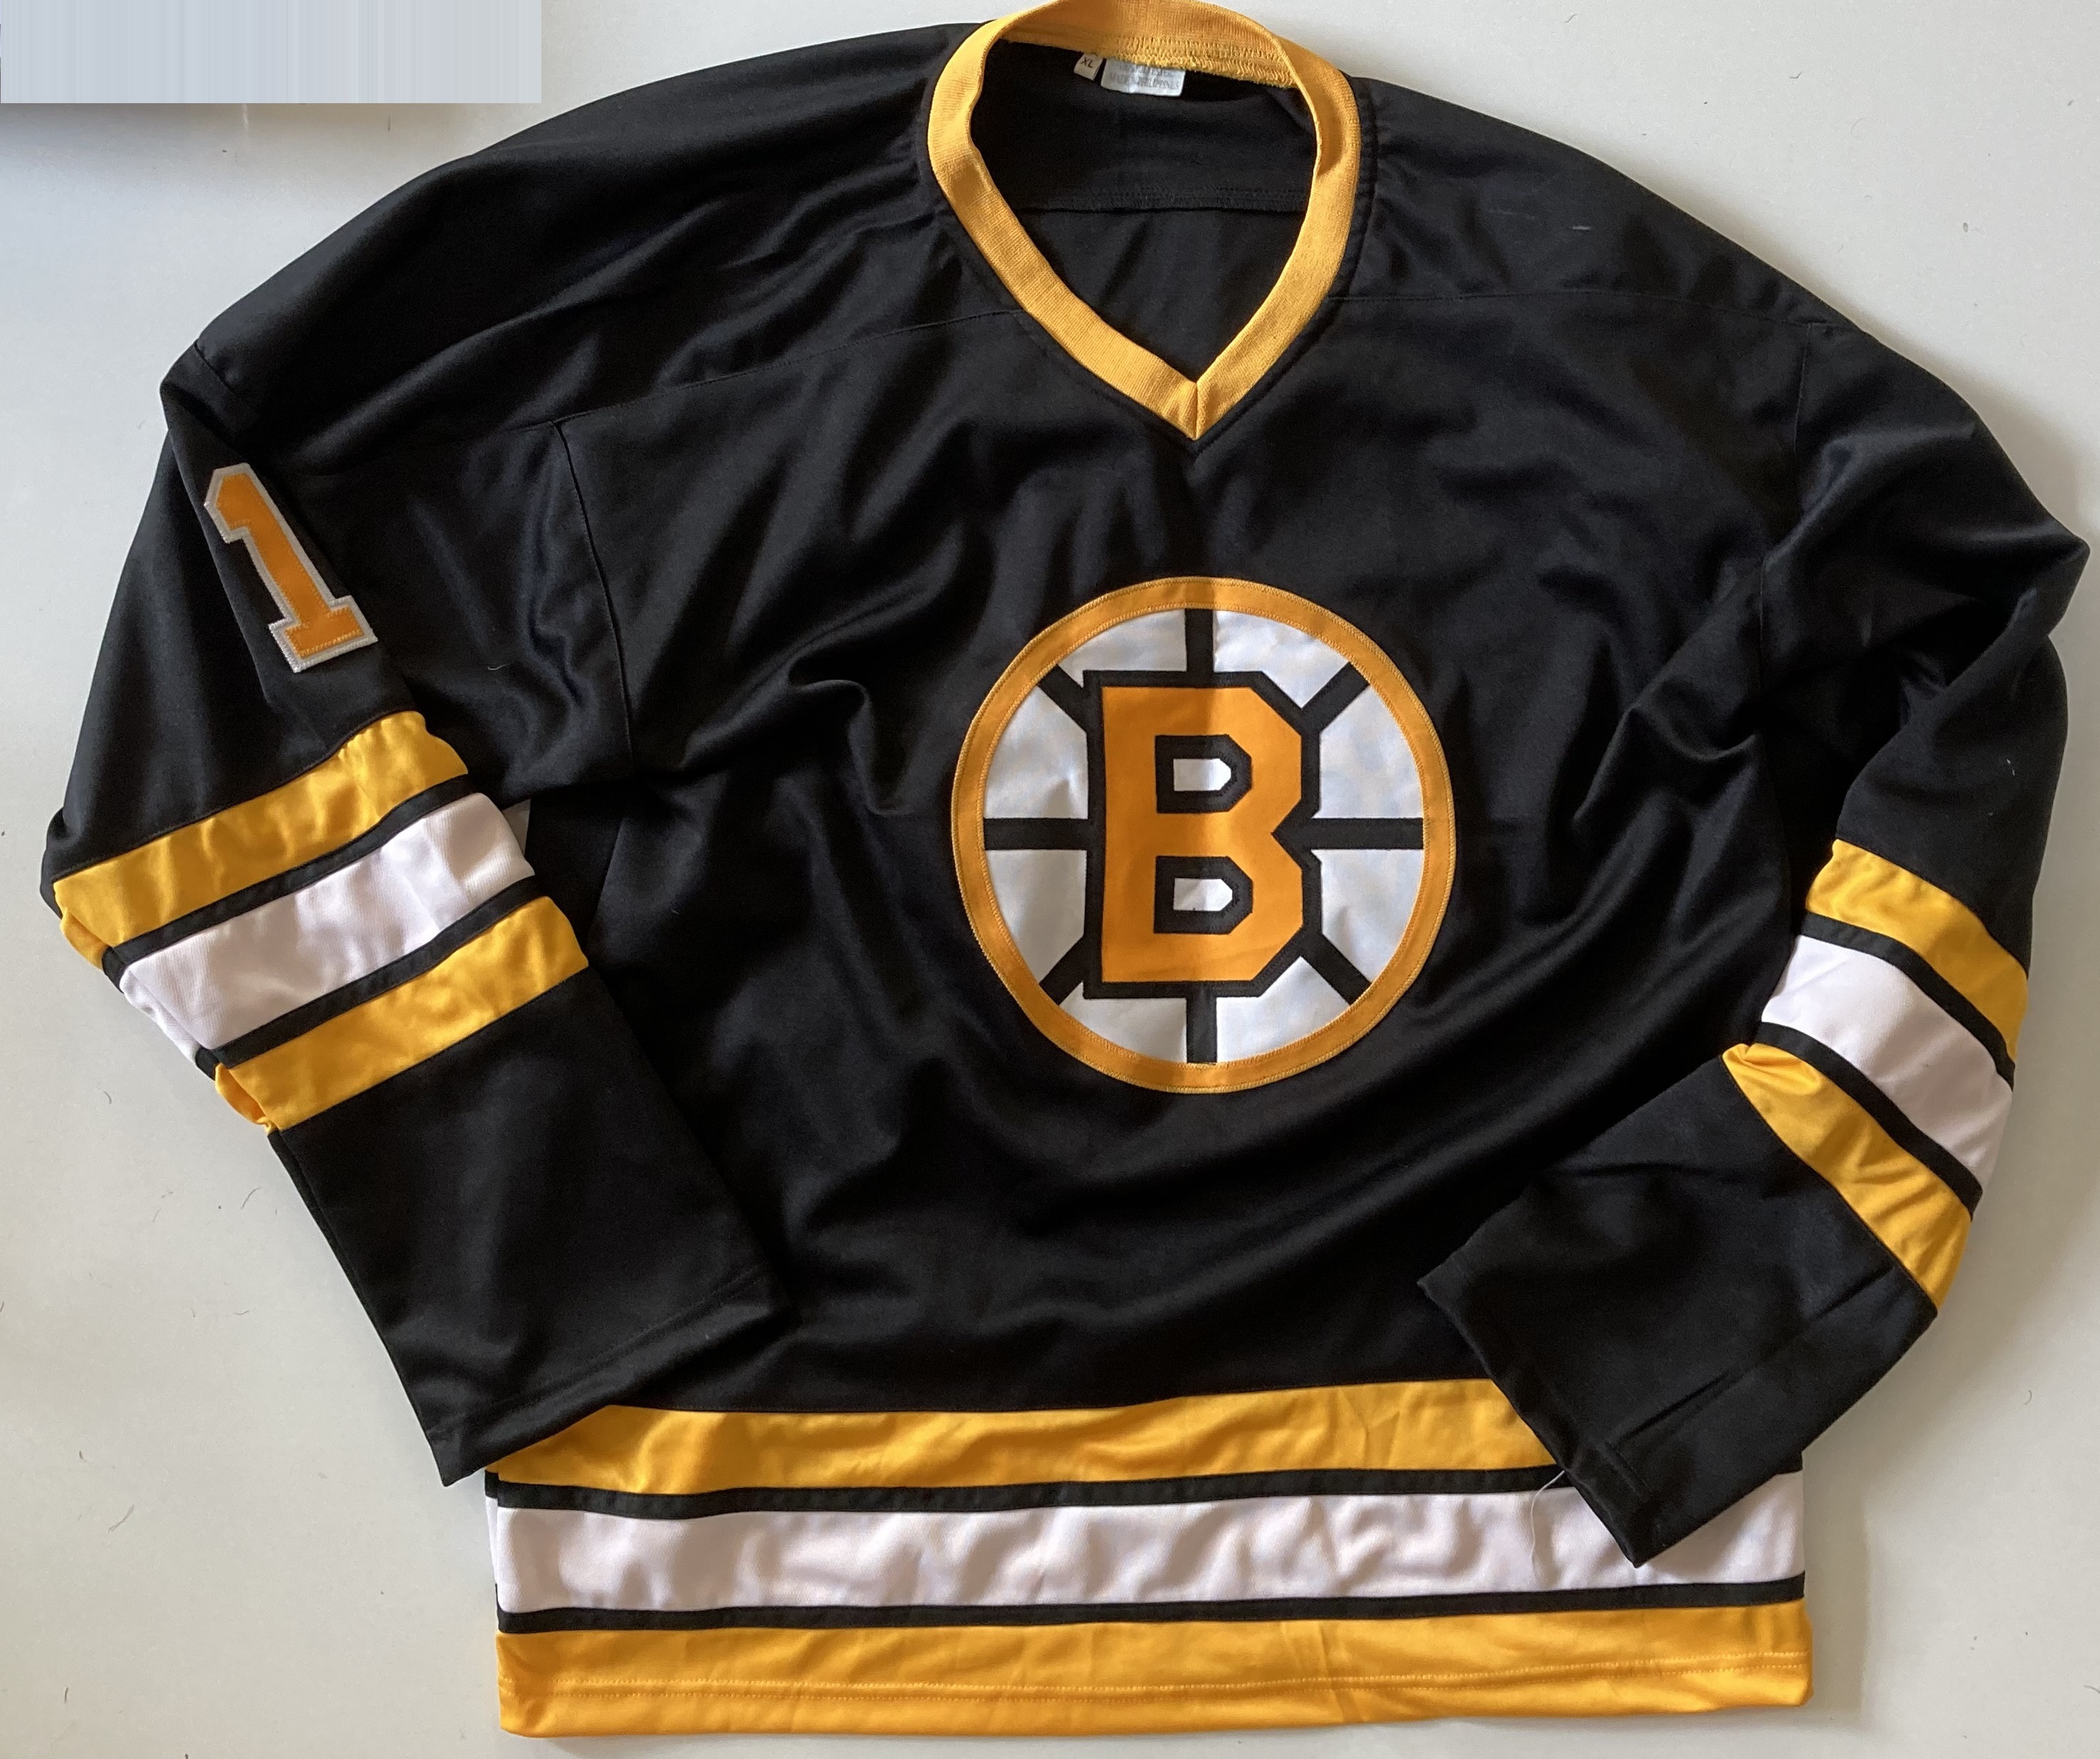 New ListingAdam Sandler SIGNED Happy Gilmore Jersey JSA Authenticated COA  XL Boston Bruins Opens in a new window or tab